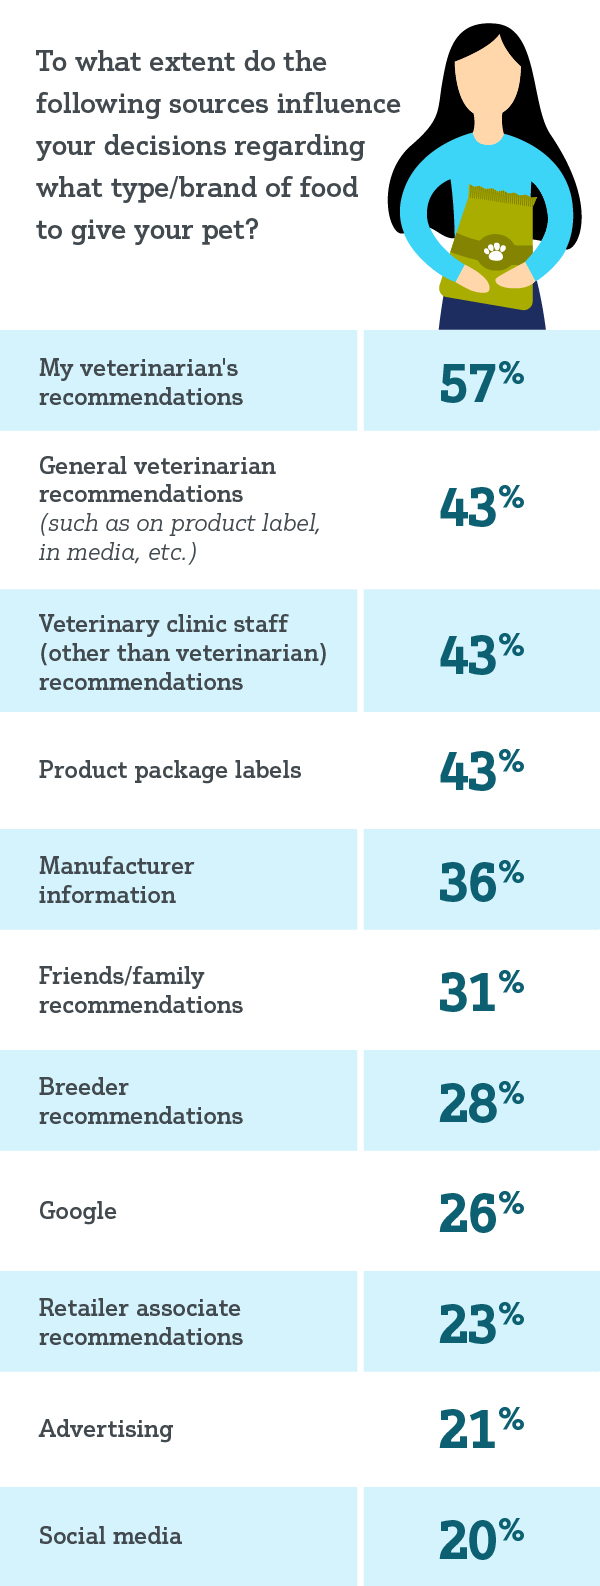 Table: Influences on type/brand of pet food